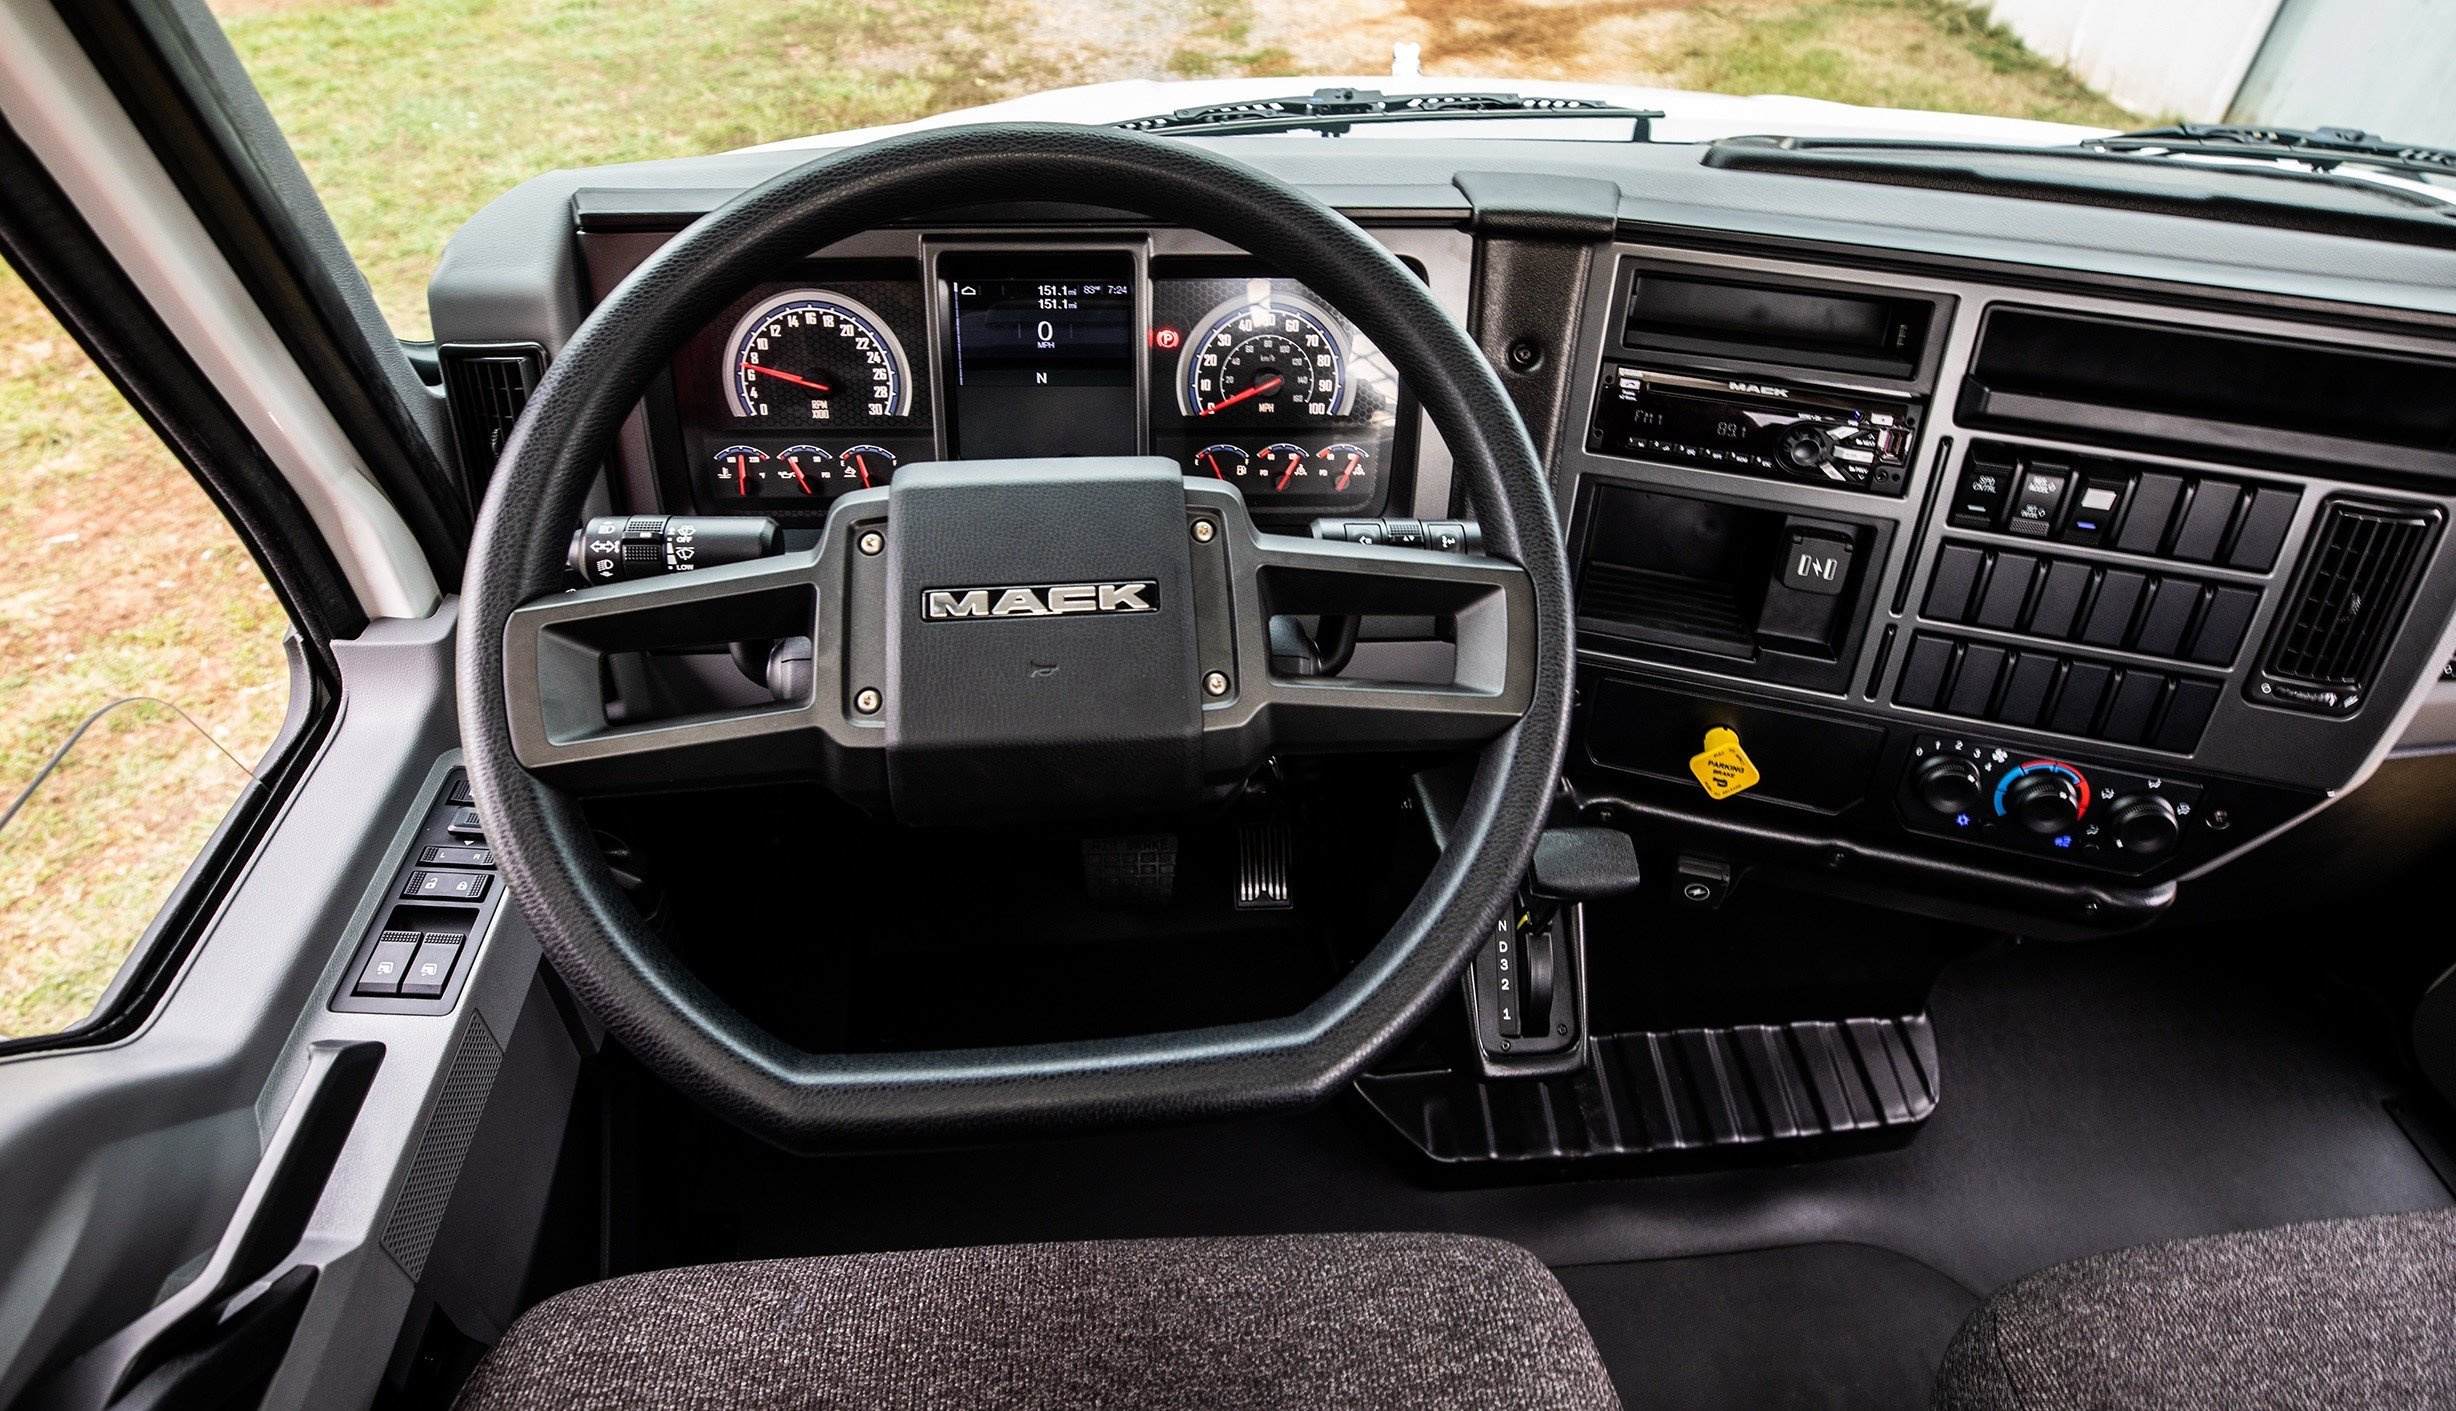 Introducing the Mack MD Series MID ONTARIO TRUCK CENTRE